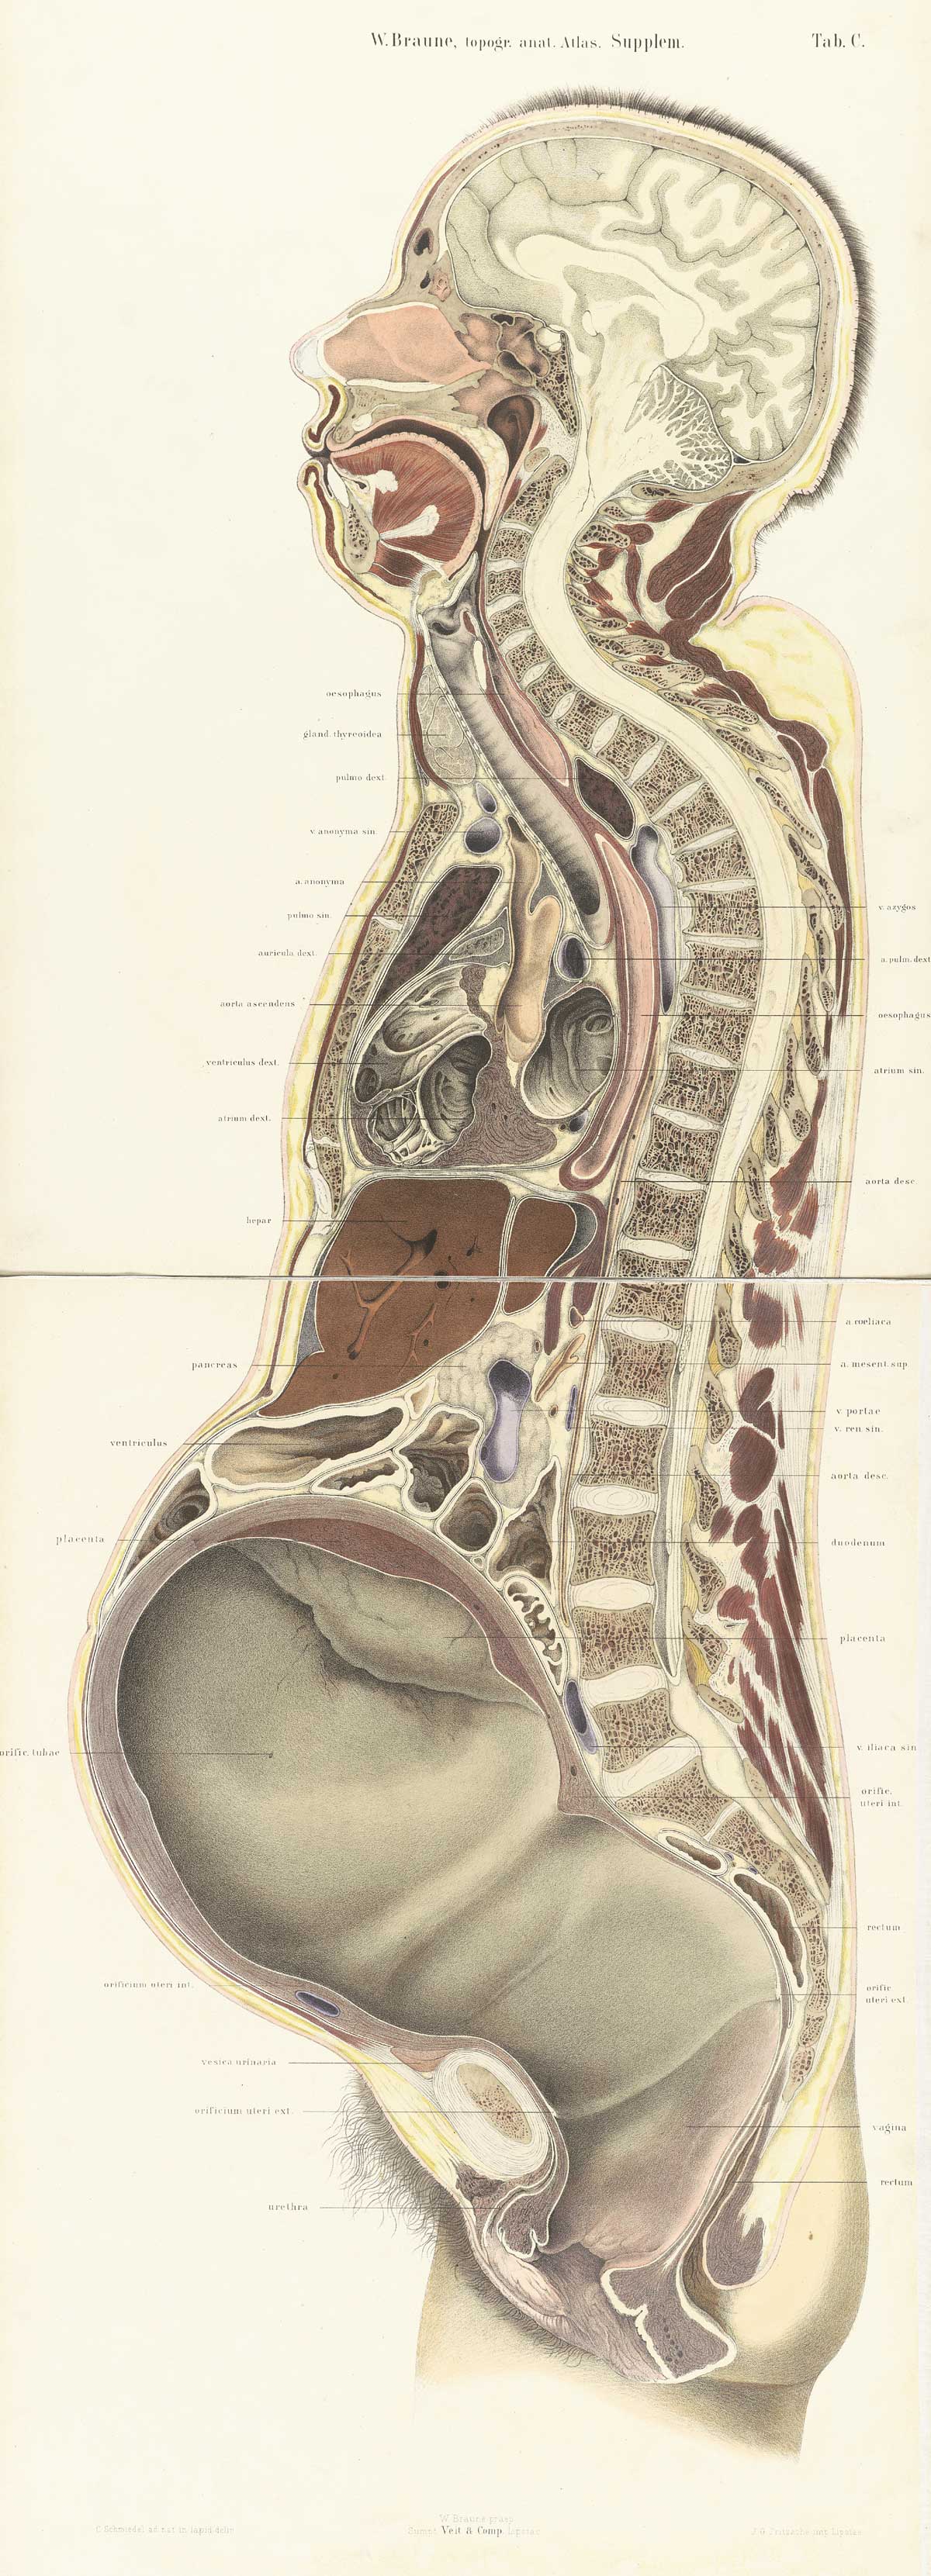 Chromolithograph of pregnant female body cross-section with the subject facing to the left, showing all structures and internal organs of the head, thorax, and abdomen, including empty womb nearly to term, from Wilhelm Braune’s Die Lage des Uterus und Foetus Ende der Schwangerschaft, nach durchschnitten an Gefrornen Cadavern, Leipzig, 1872.